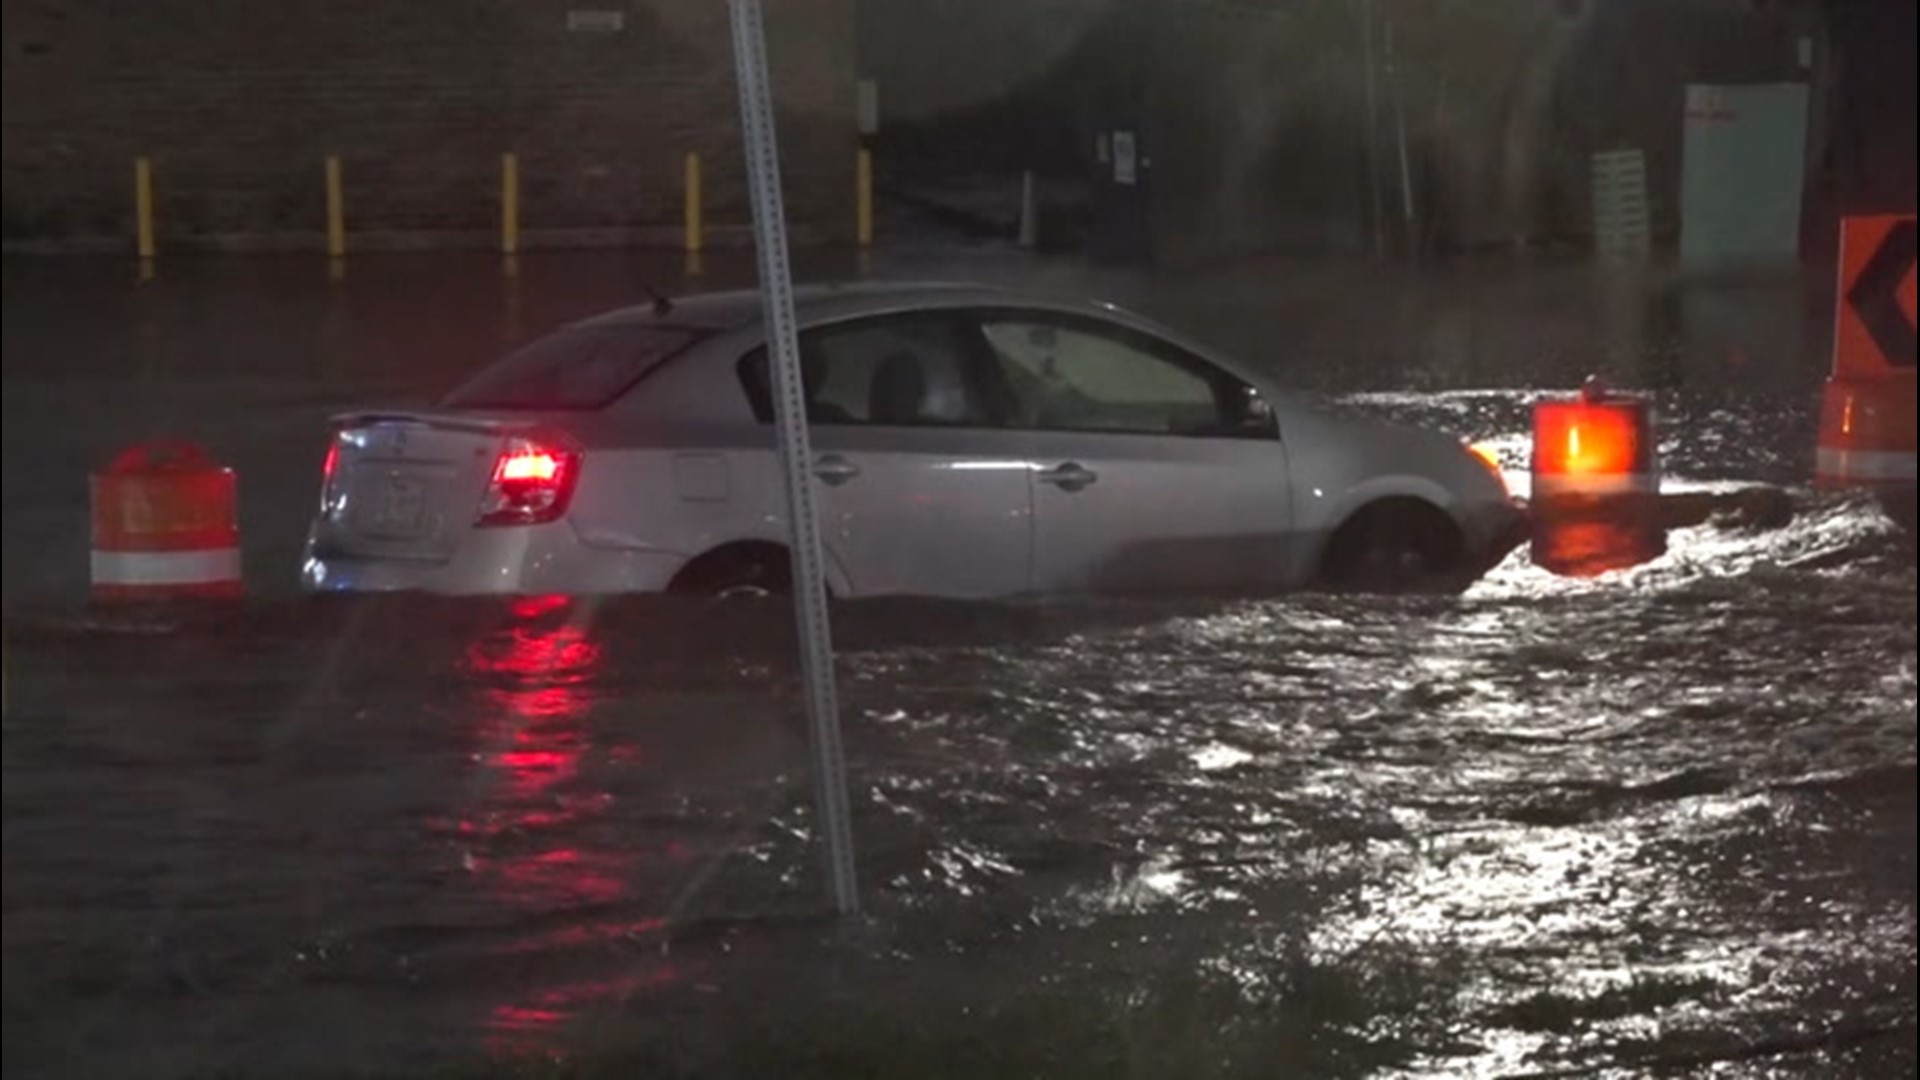 Dozens of drivers got stuck on flooded streets as Tropical Storm Beta dumped roughly a foot of rain in the Houston and Galveston areas.